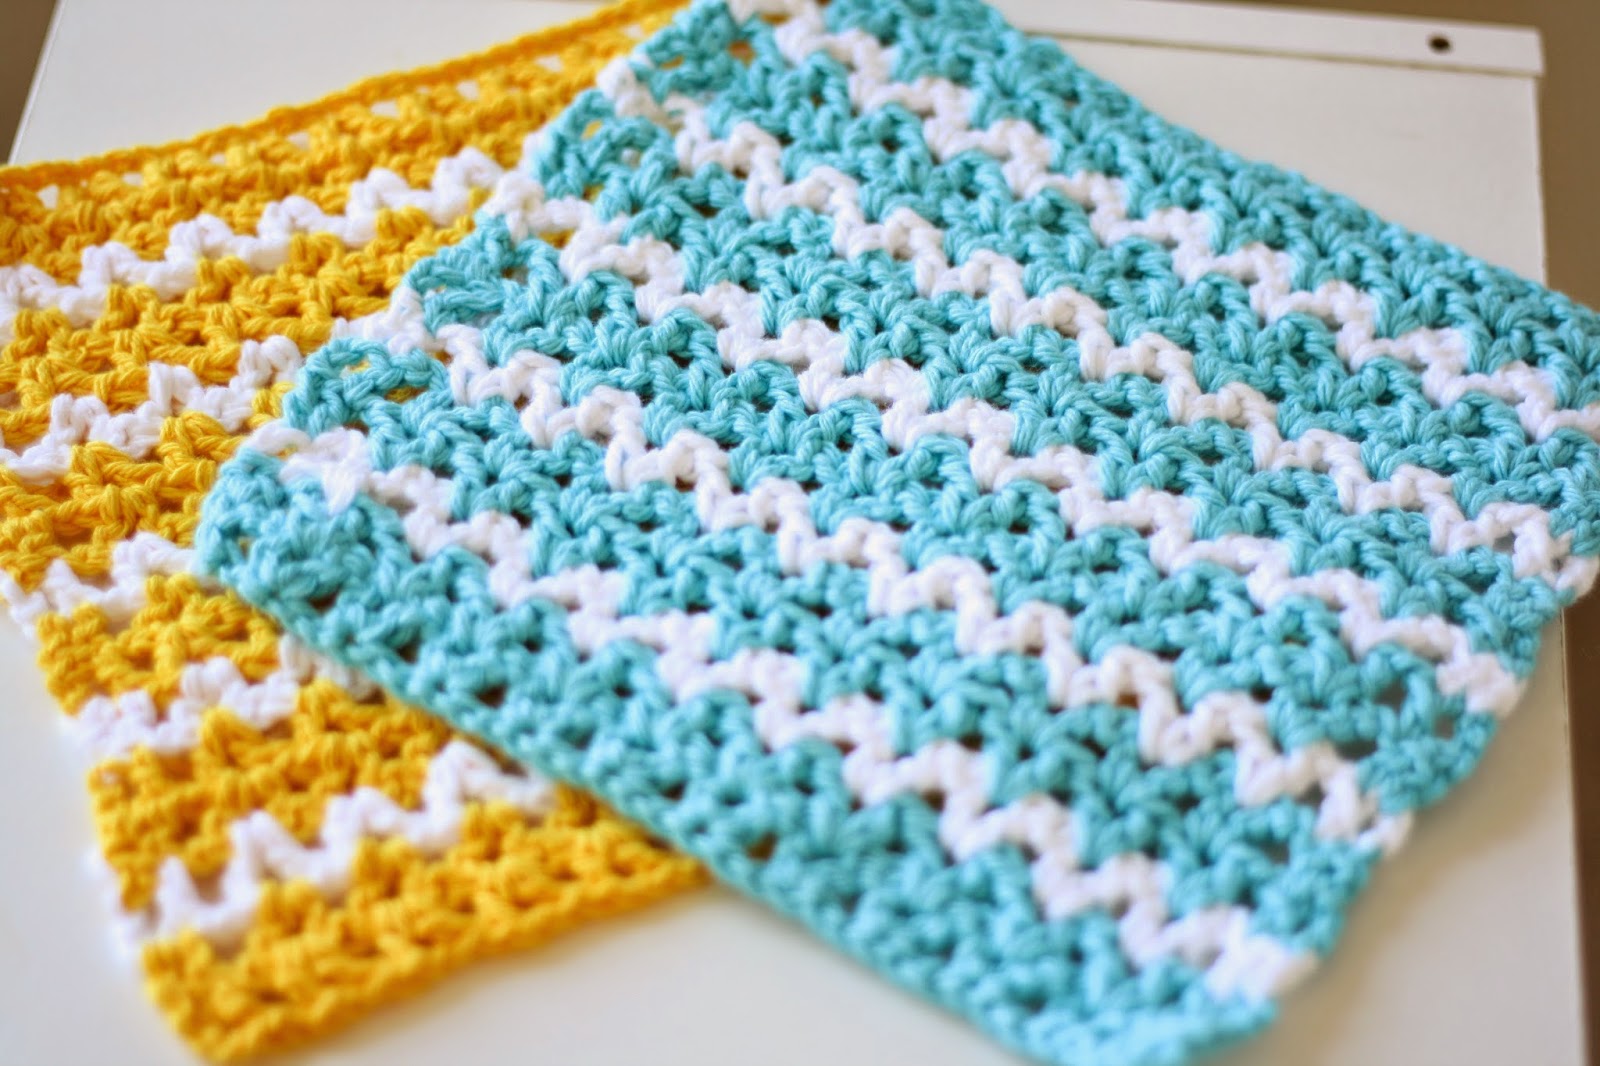 How To Make A Simple Crochet Dishcloth - BEST HOME DESIGN IDEAS